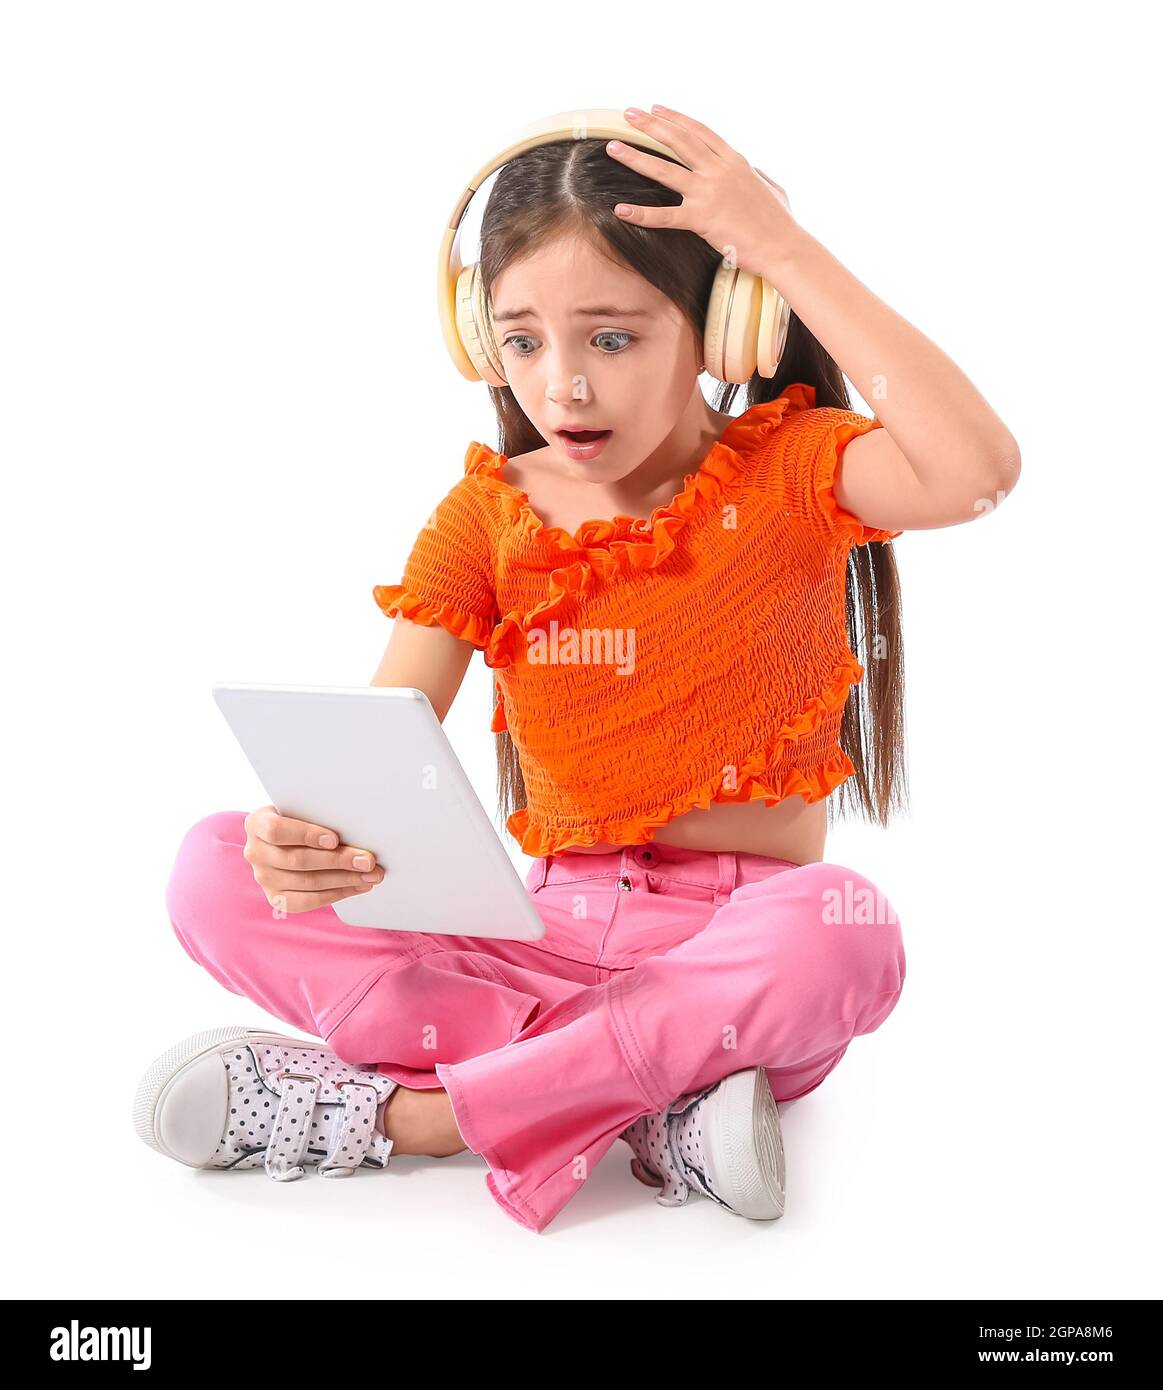 Shocked little girl with headphones and tablet computer on white background Stock Photo